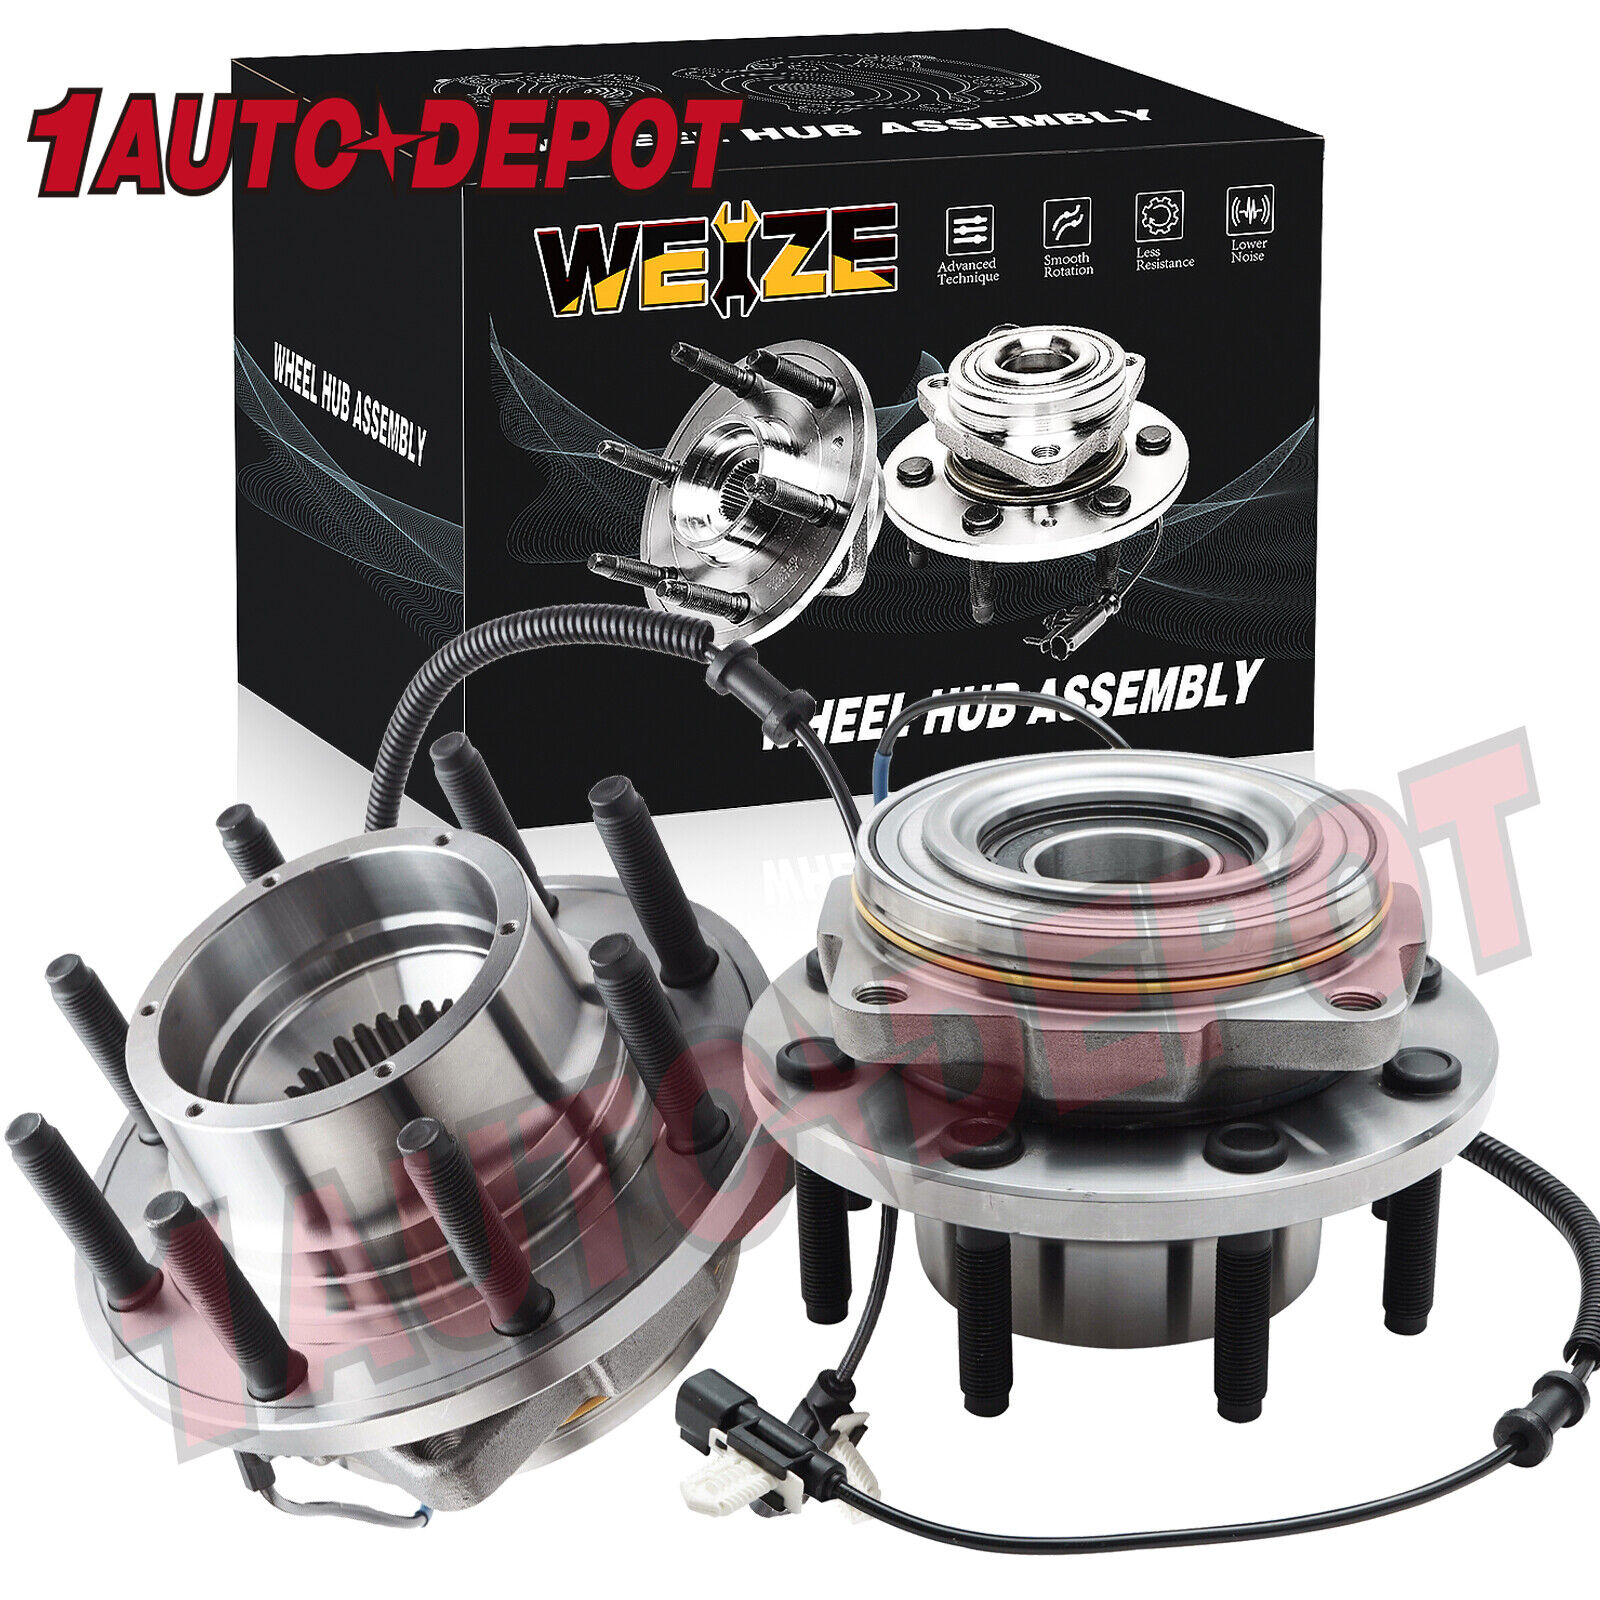 4WD Front Wheel Bearing Hubs for 2011 - 2016 Ford F-250 F-350 Super Duty SRW x2